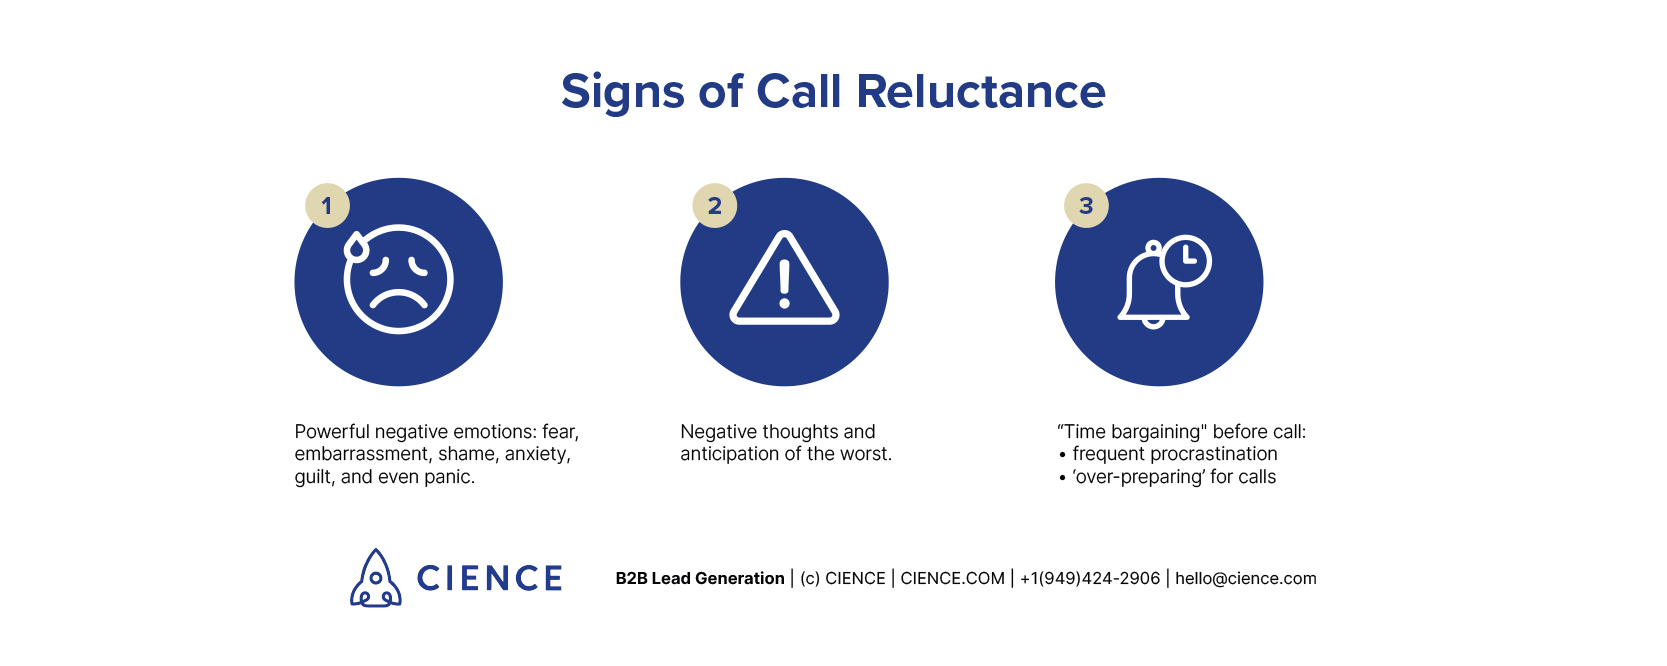 Major signs of call reluctance